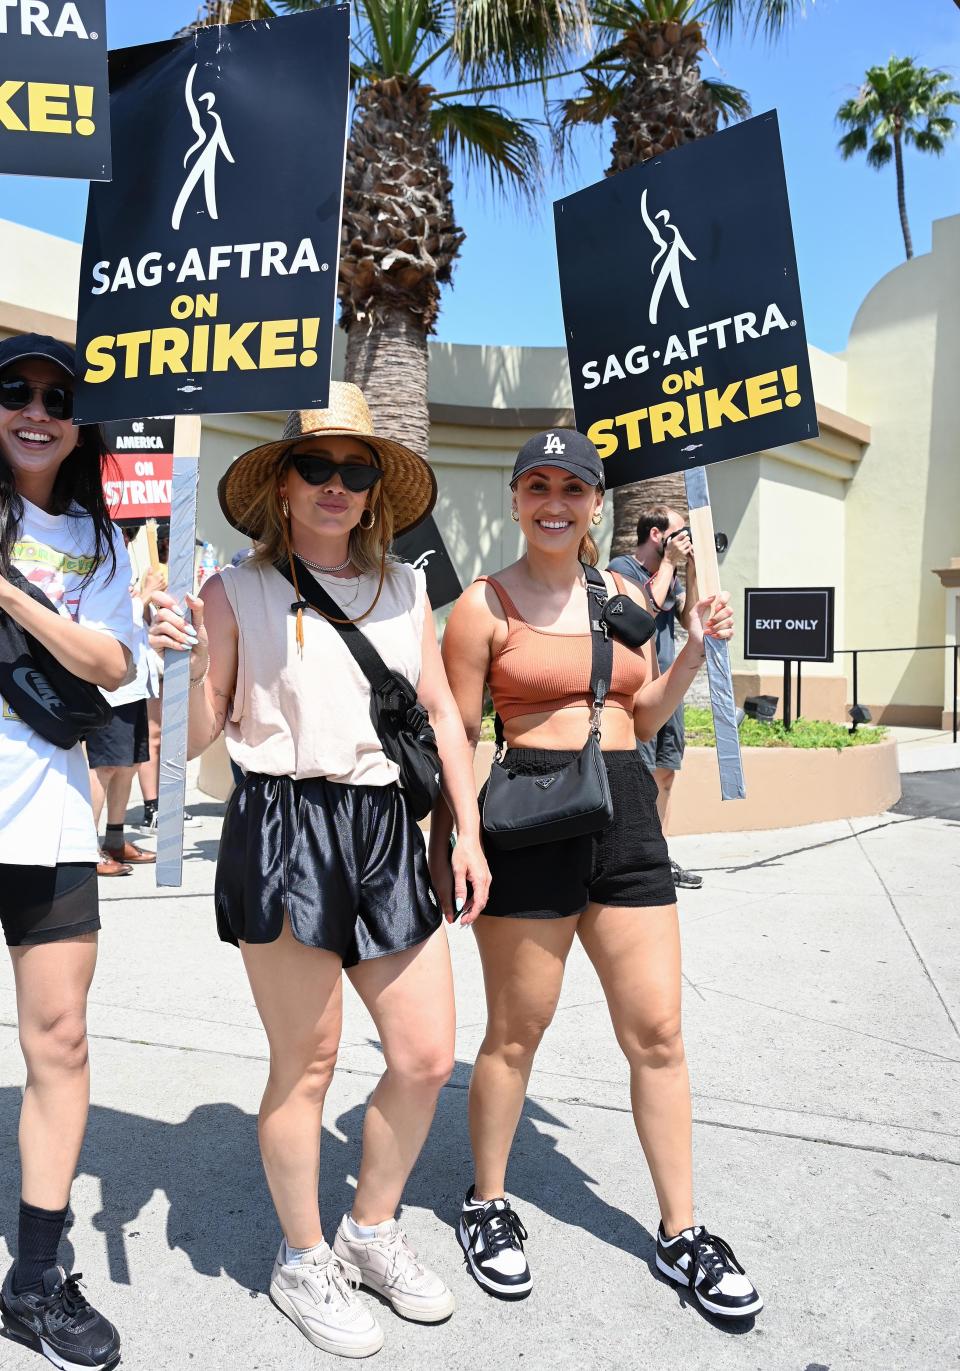 Tien Tran, Hilary Duff, and Francia Raisa picketed on July 17 in Los Angeles.